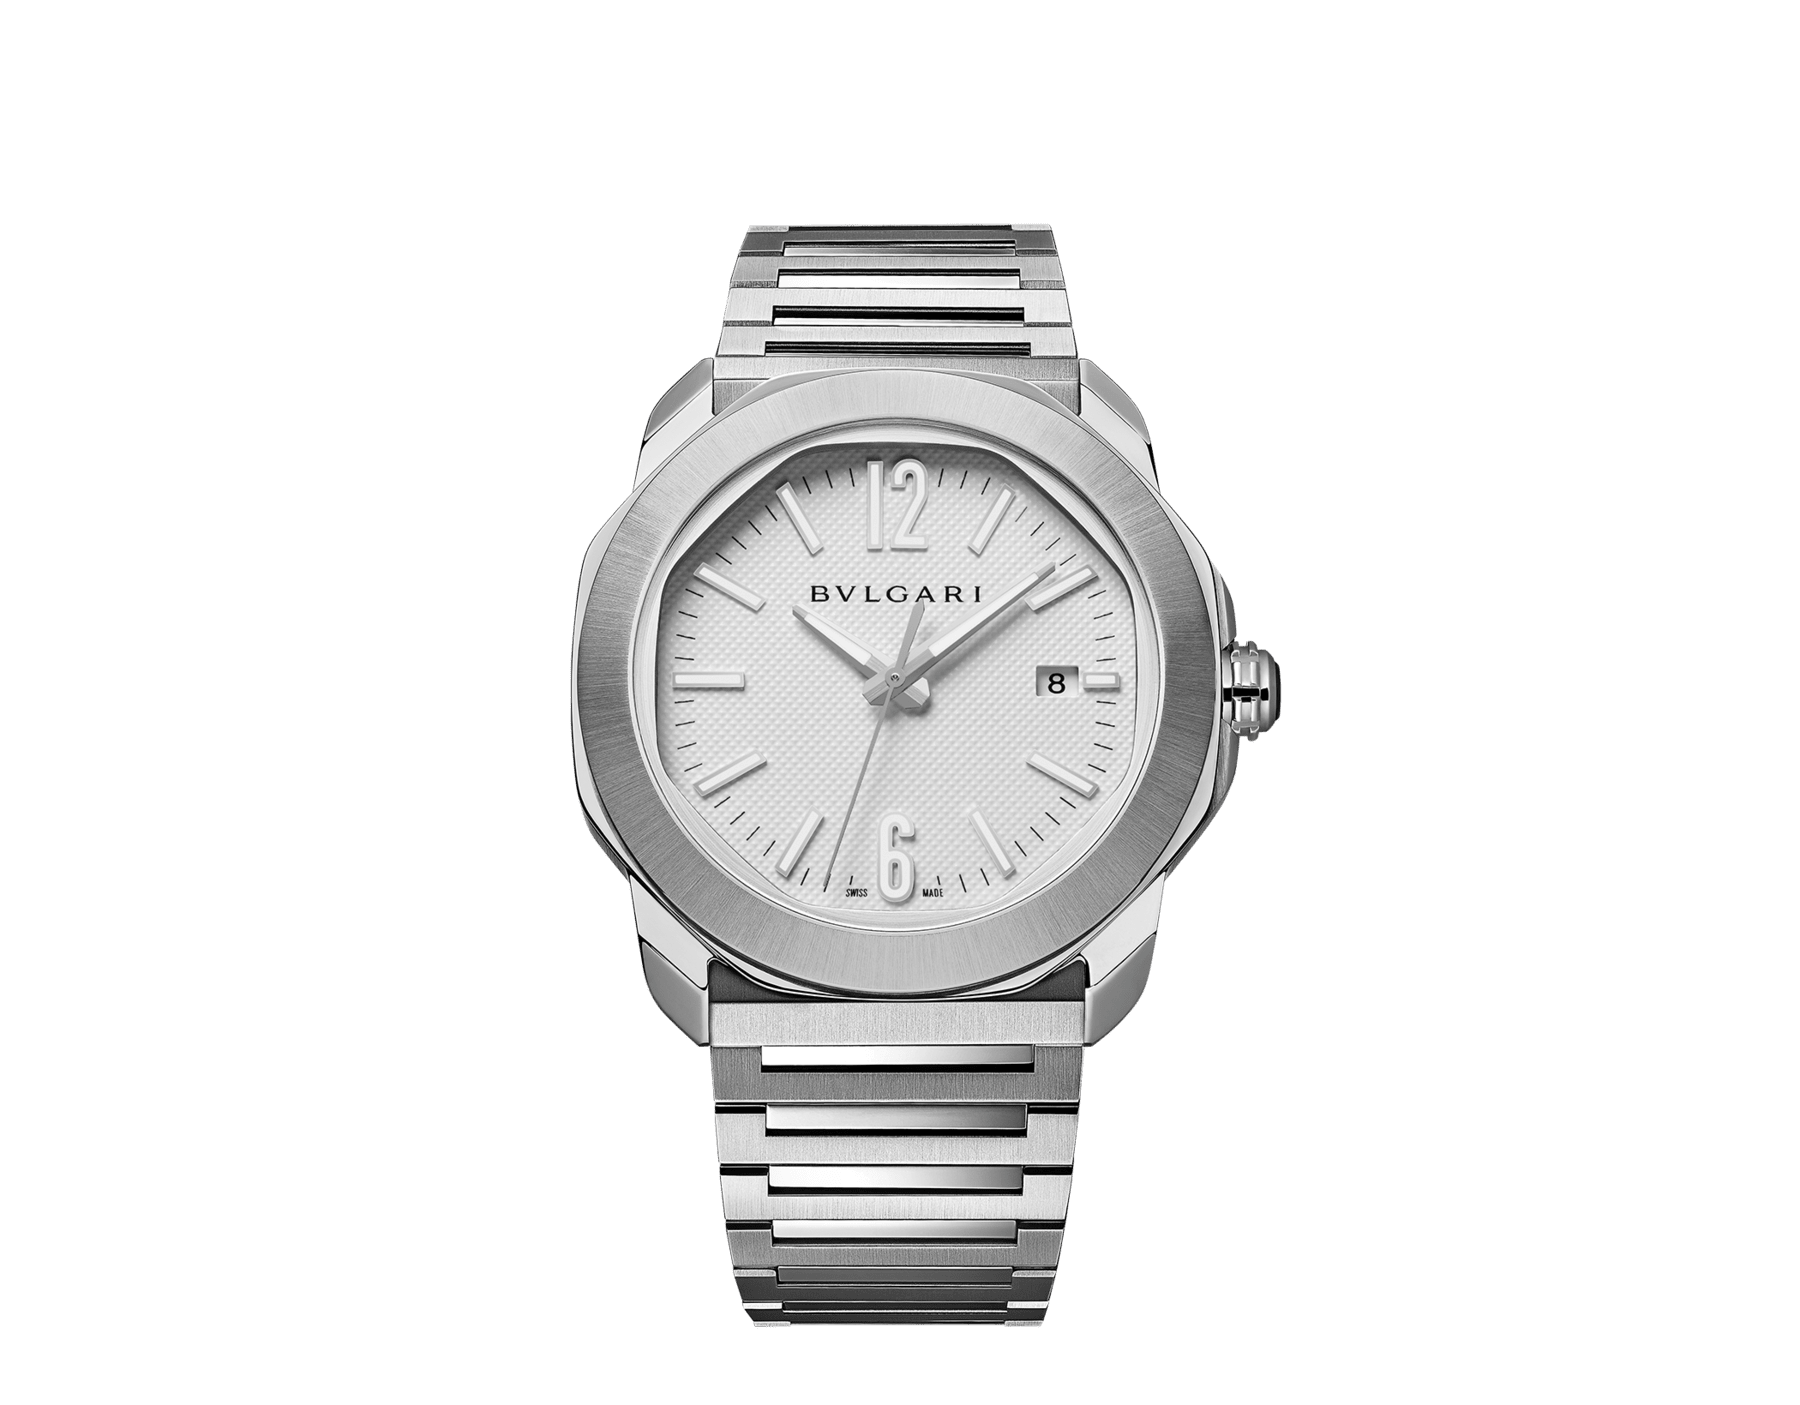 Octo Roma Automatic watch with mechanical manufacture movement, automatic winding, satin-brushed and polished stainless steel case and interchangeable bracelet, white Clous de Paris dial. Water resistant up to 100 meters 103738 image 1